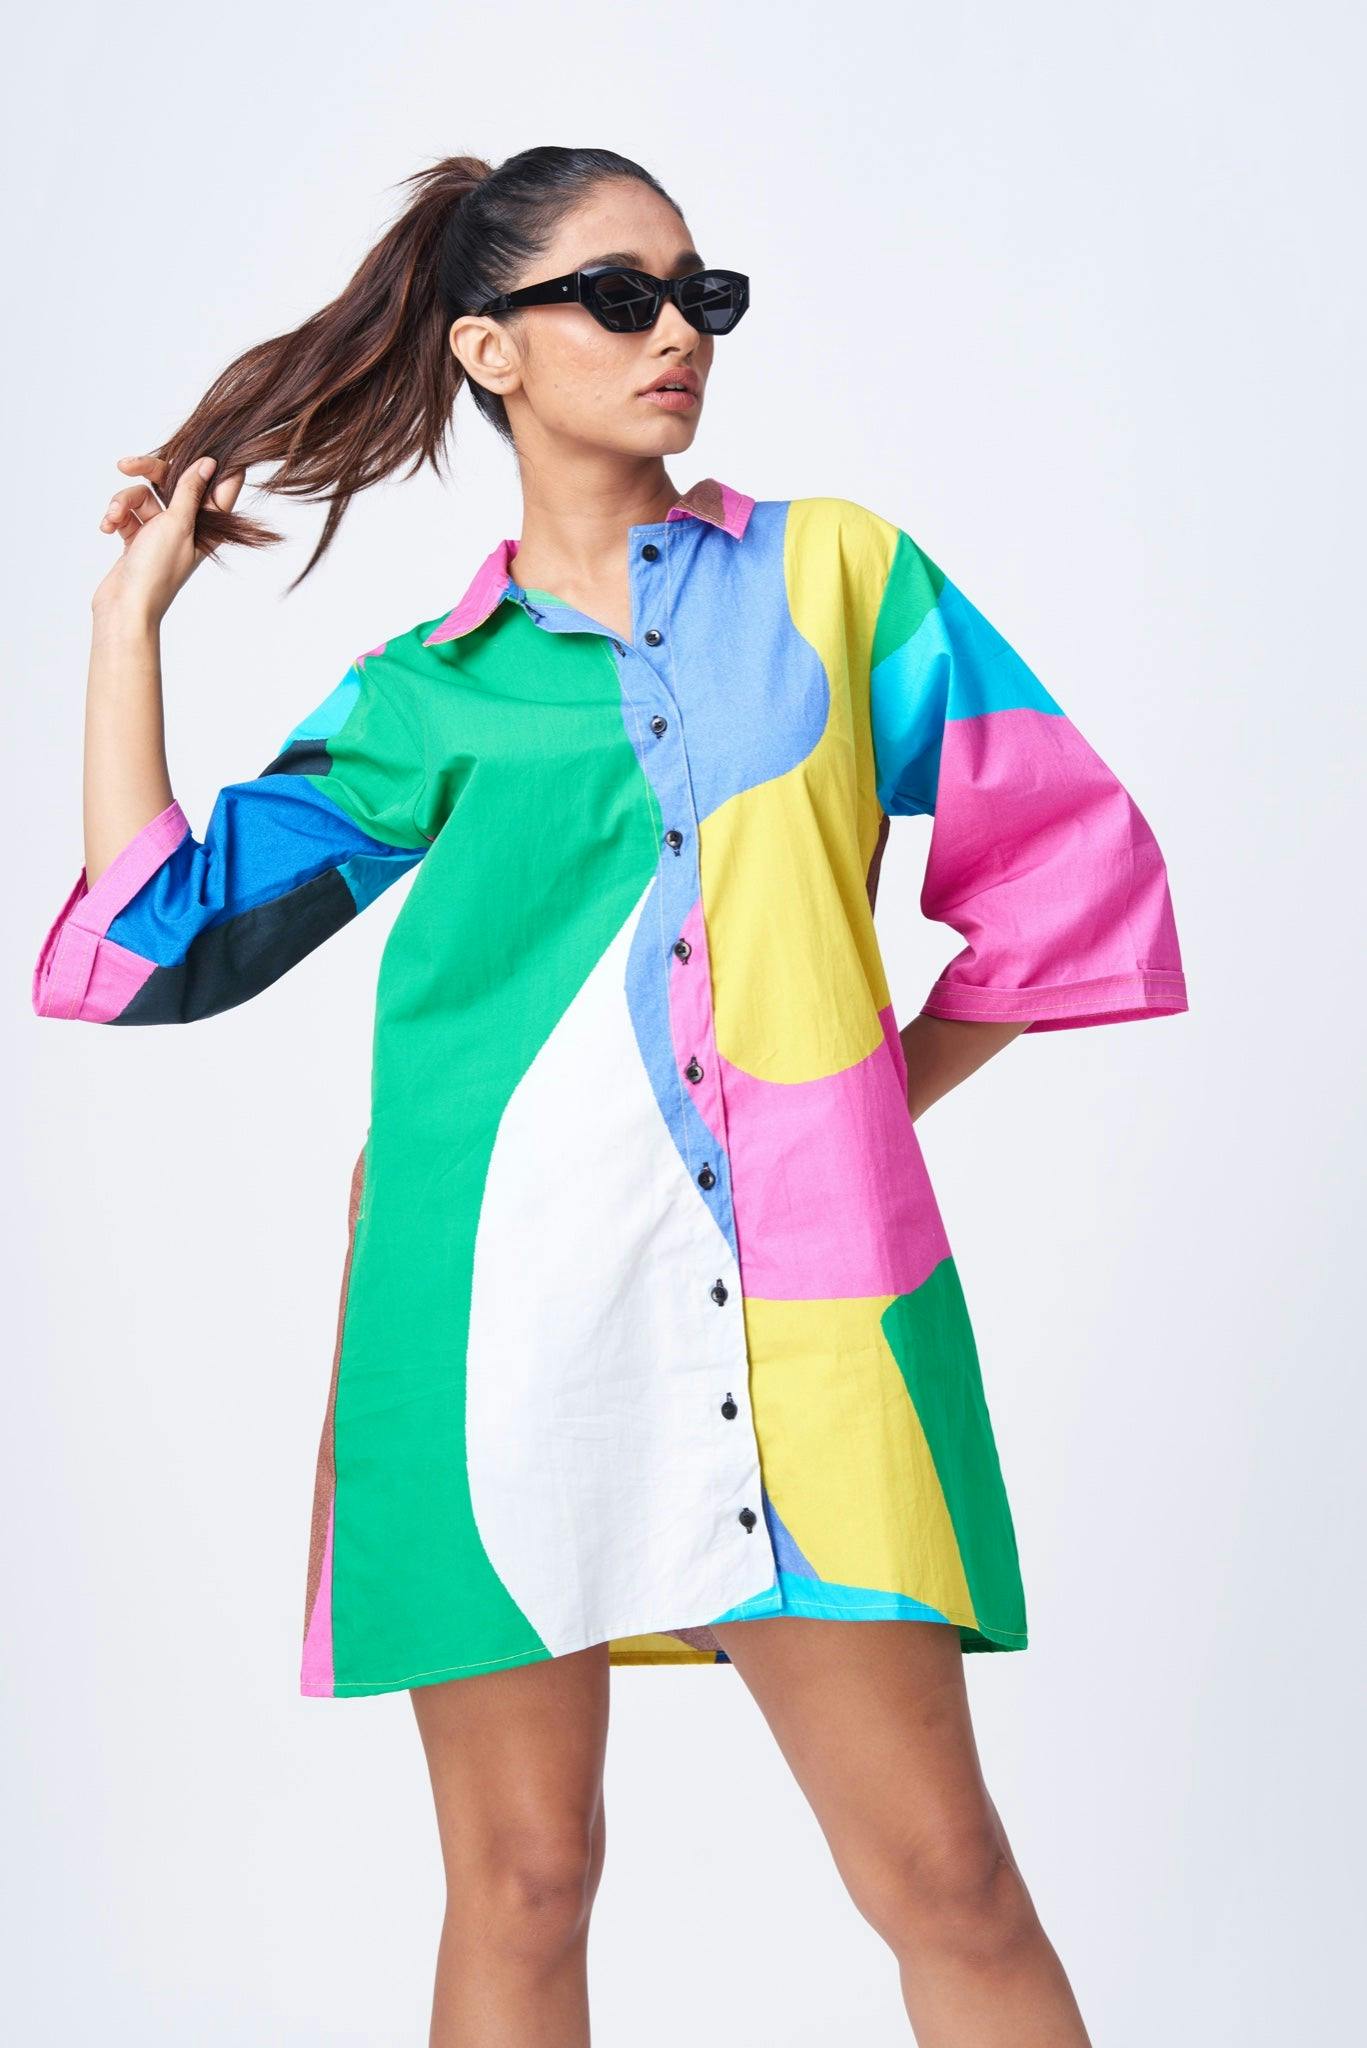 New town [ shirt dress], a product by Radharaman